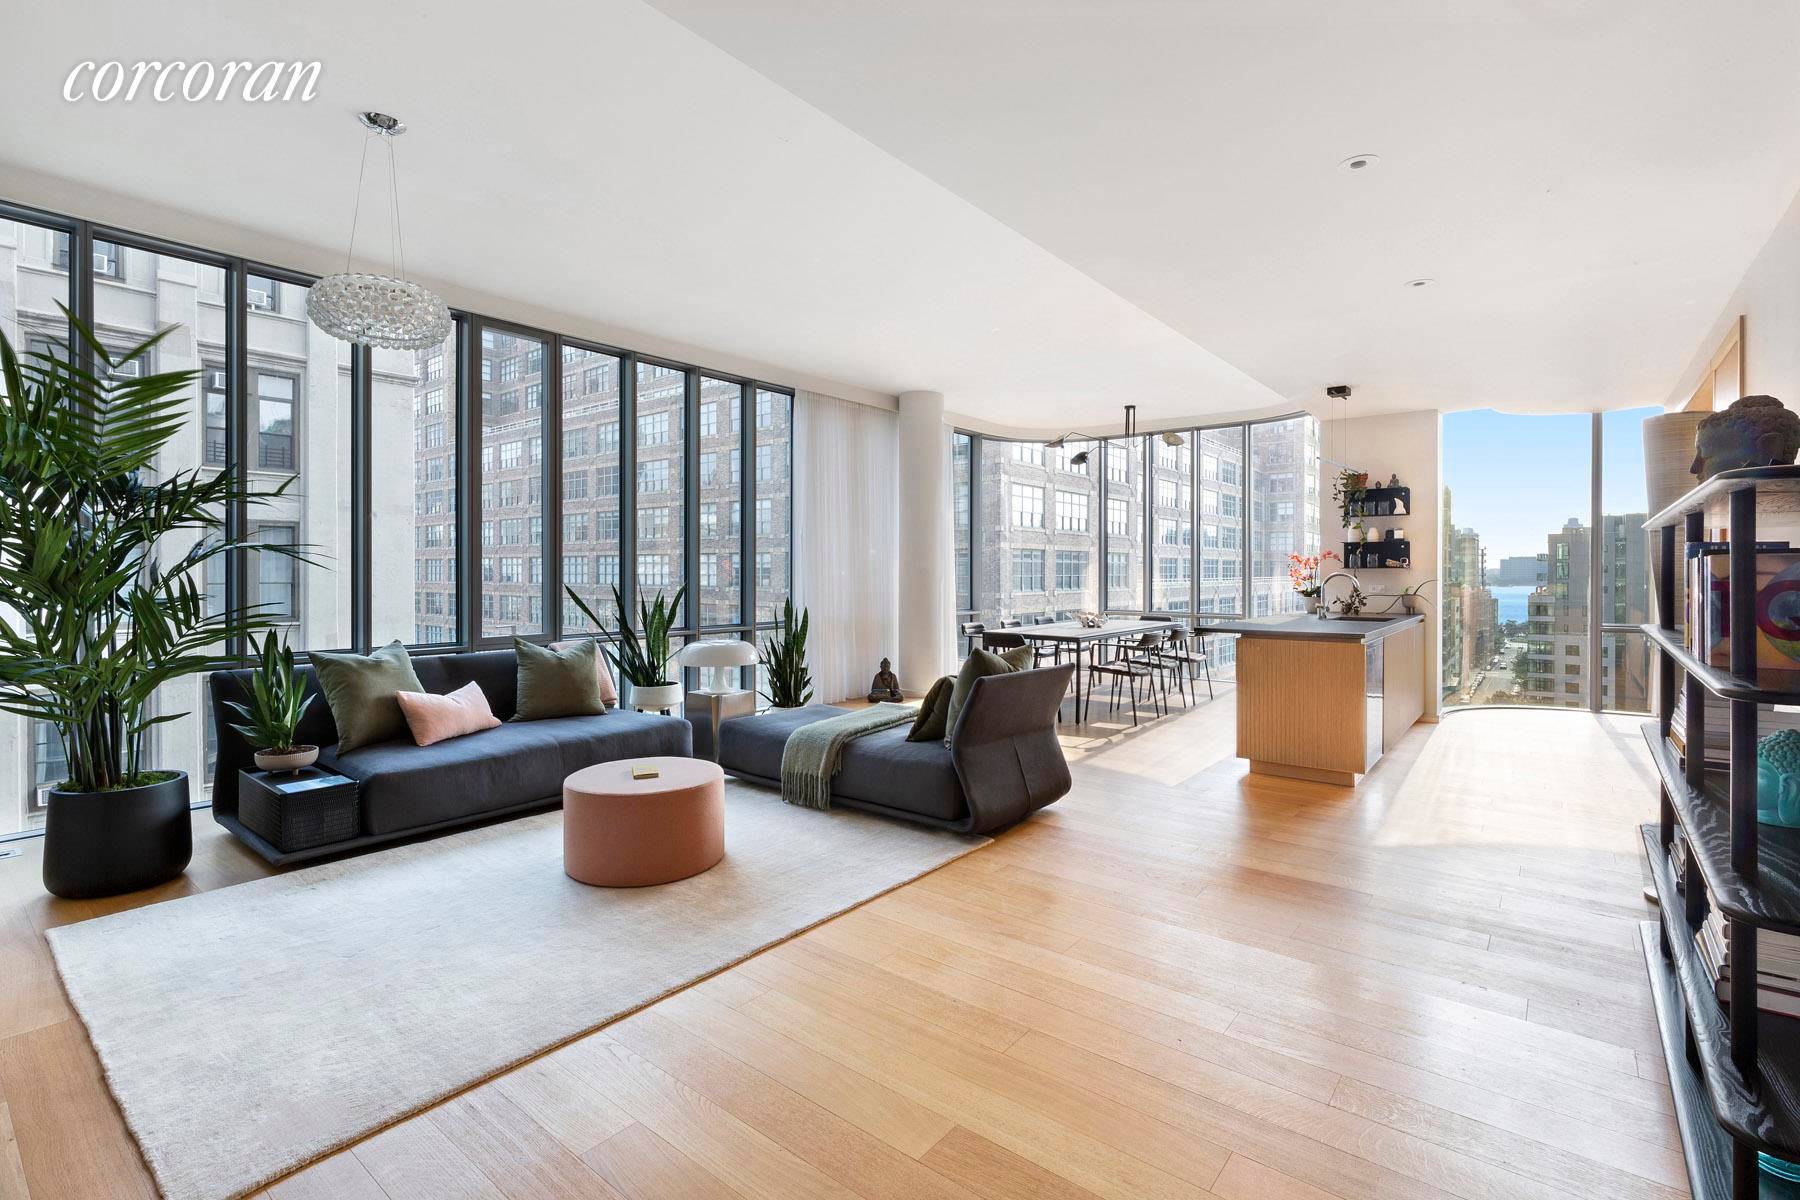 Welcome to SoHo's most impressive building in this stunning two bedroom, two and a half bathroom residence at Renzo Piano's 565 Broome Street.